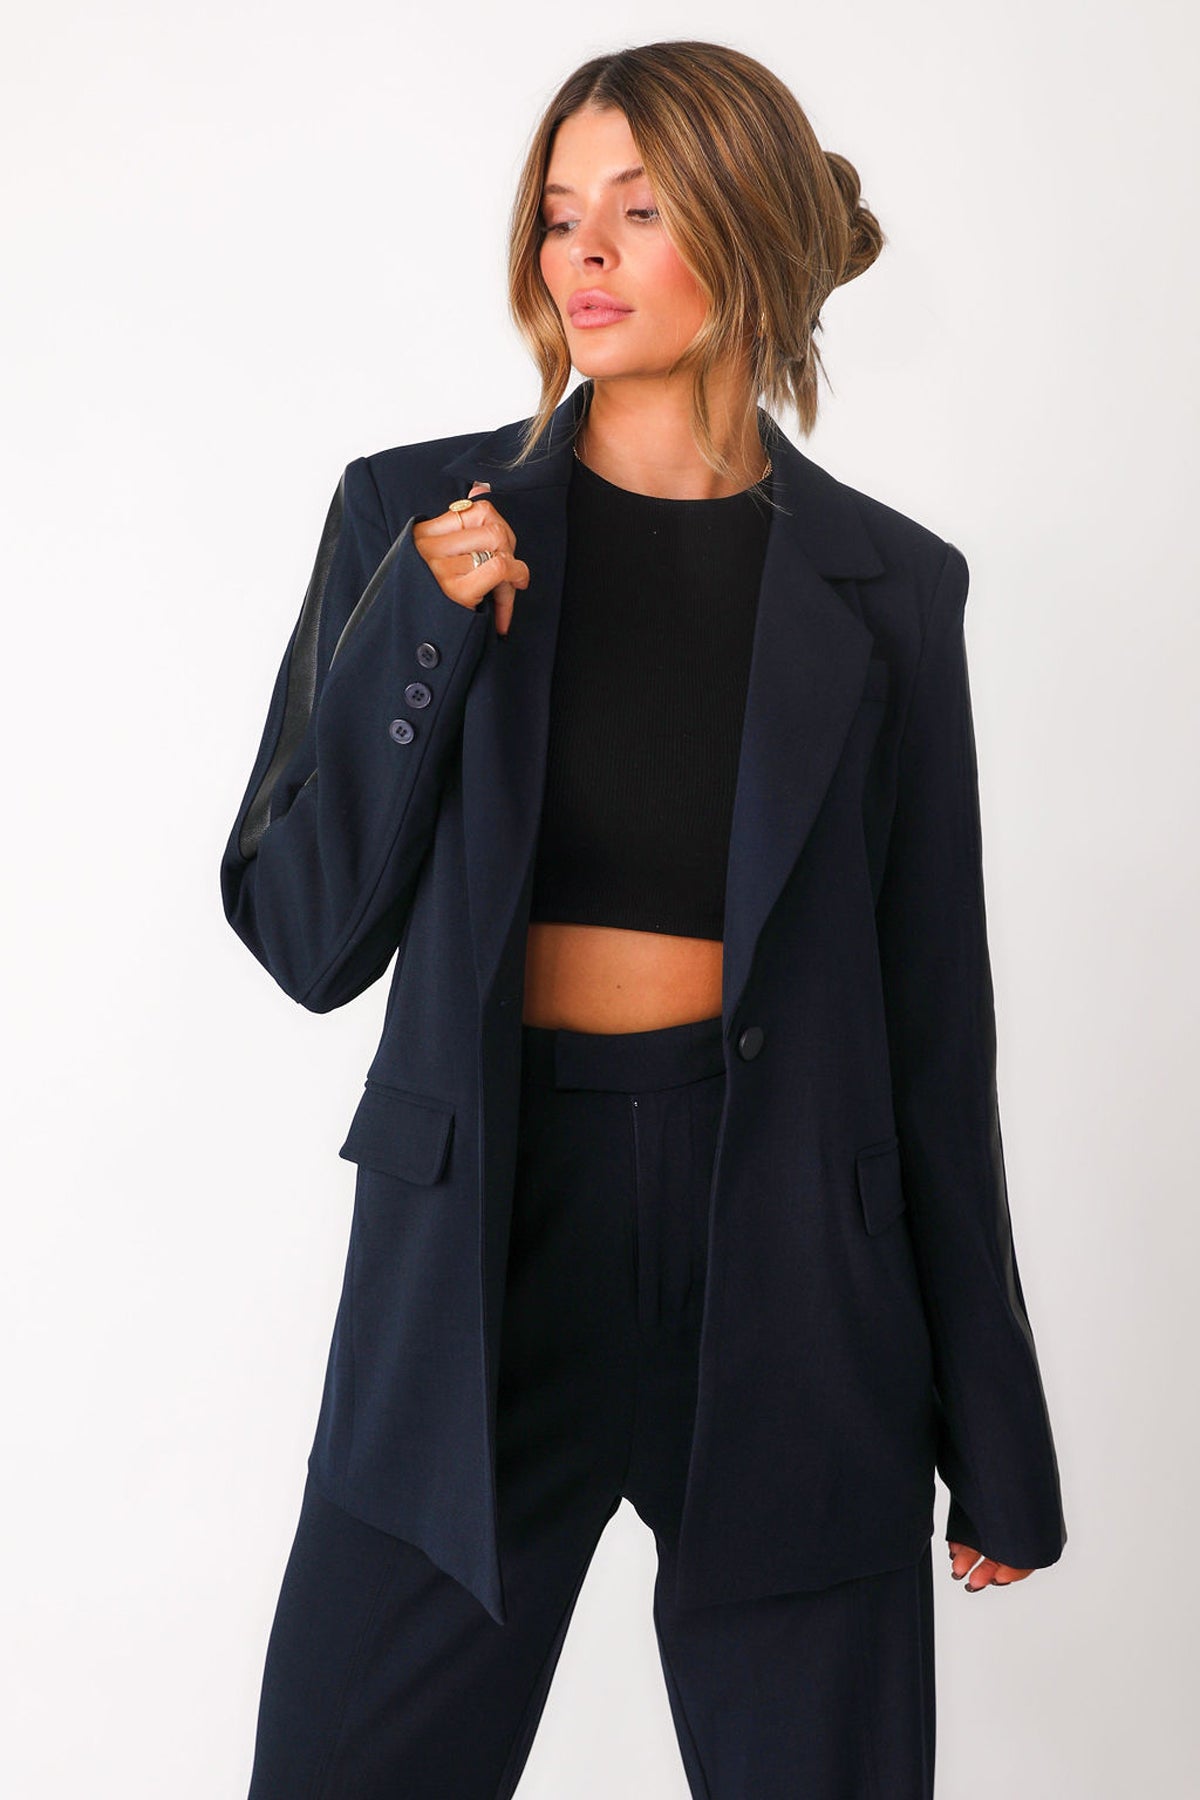 Close up front view of model wearing 'Bianca' navy trousers with faux black leather paneling detail down outer seam of sleeves, paired with matching 'Bianca' navy blazer worn open over black basics bra tank.